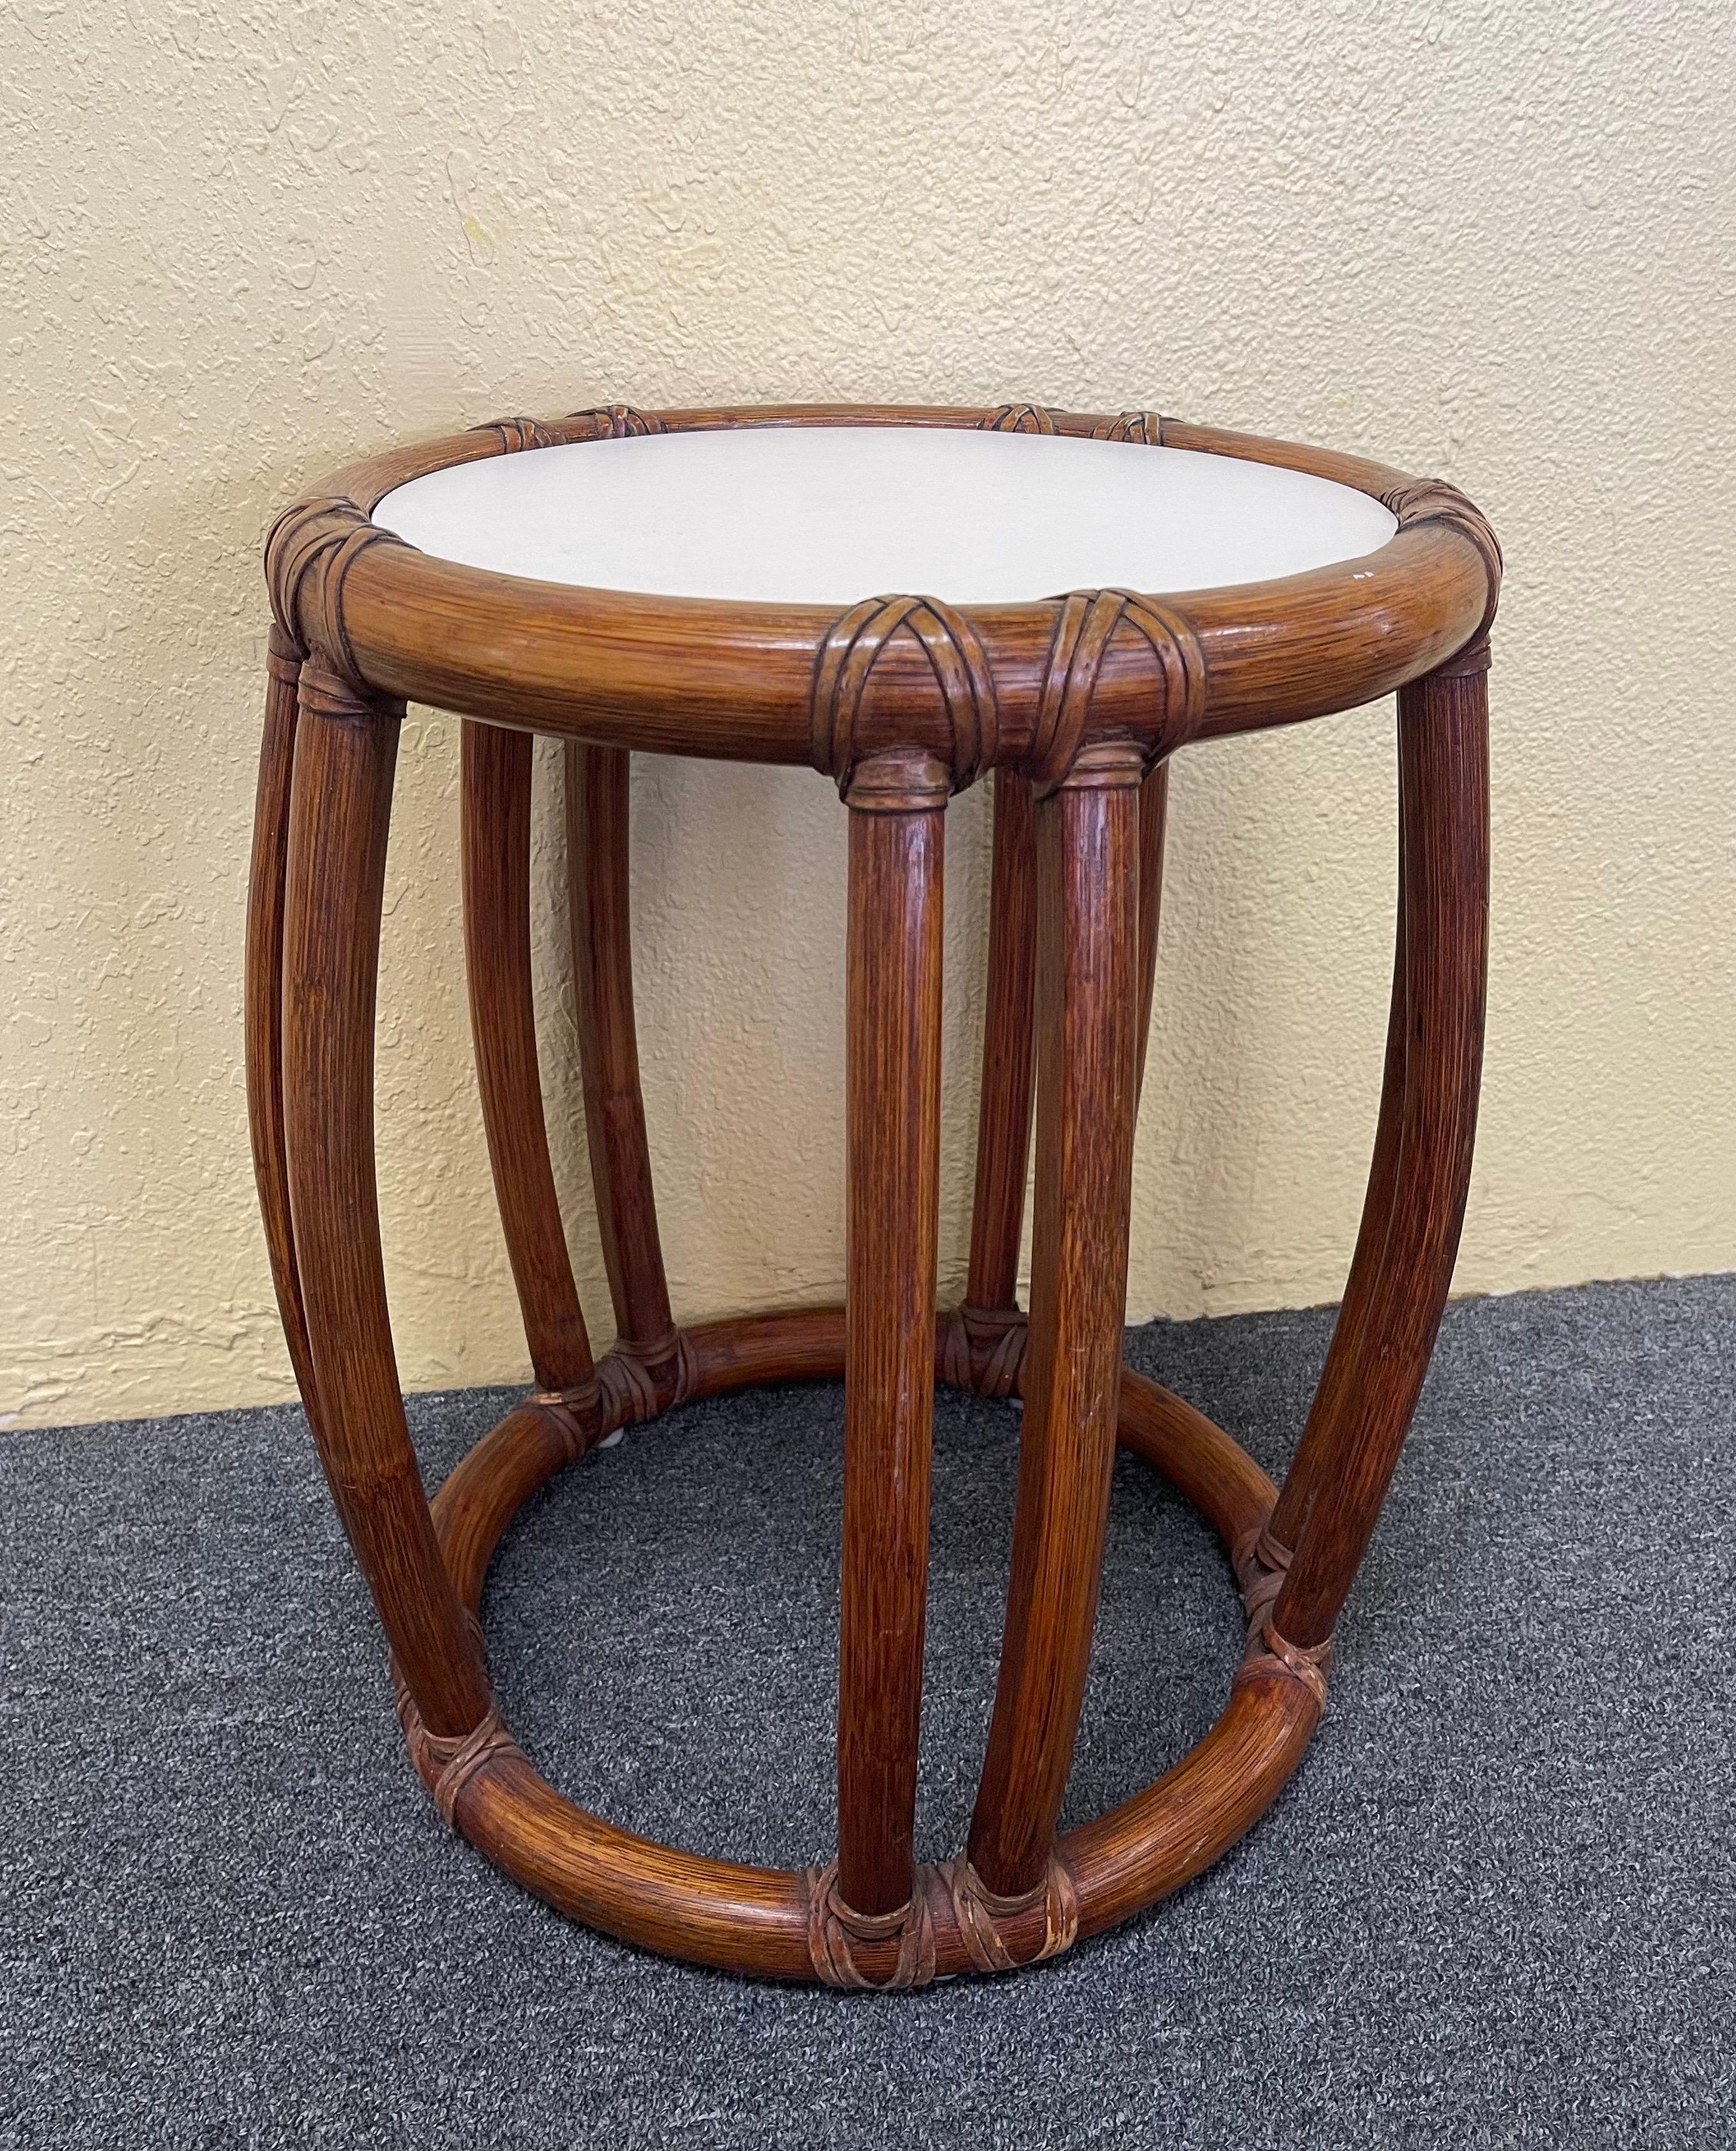 Bamboo Side Tables / Garden Stools by McGuire Furniture Co. of San Francisco 1